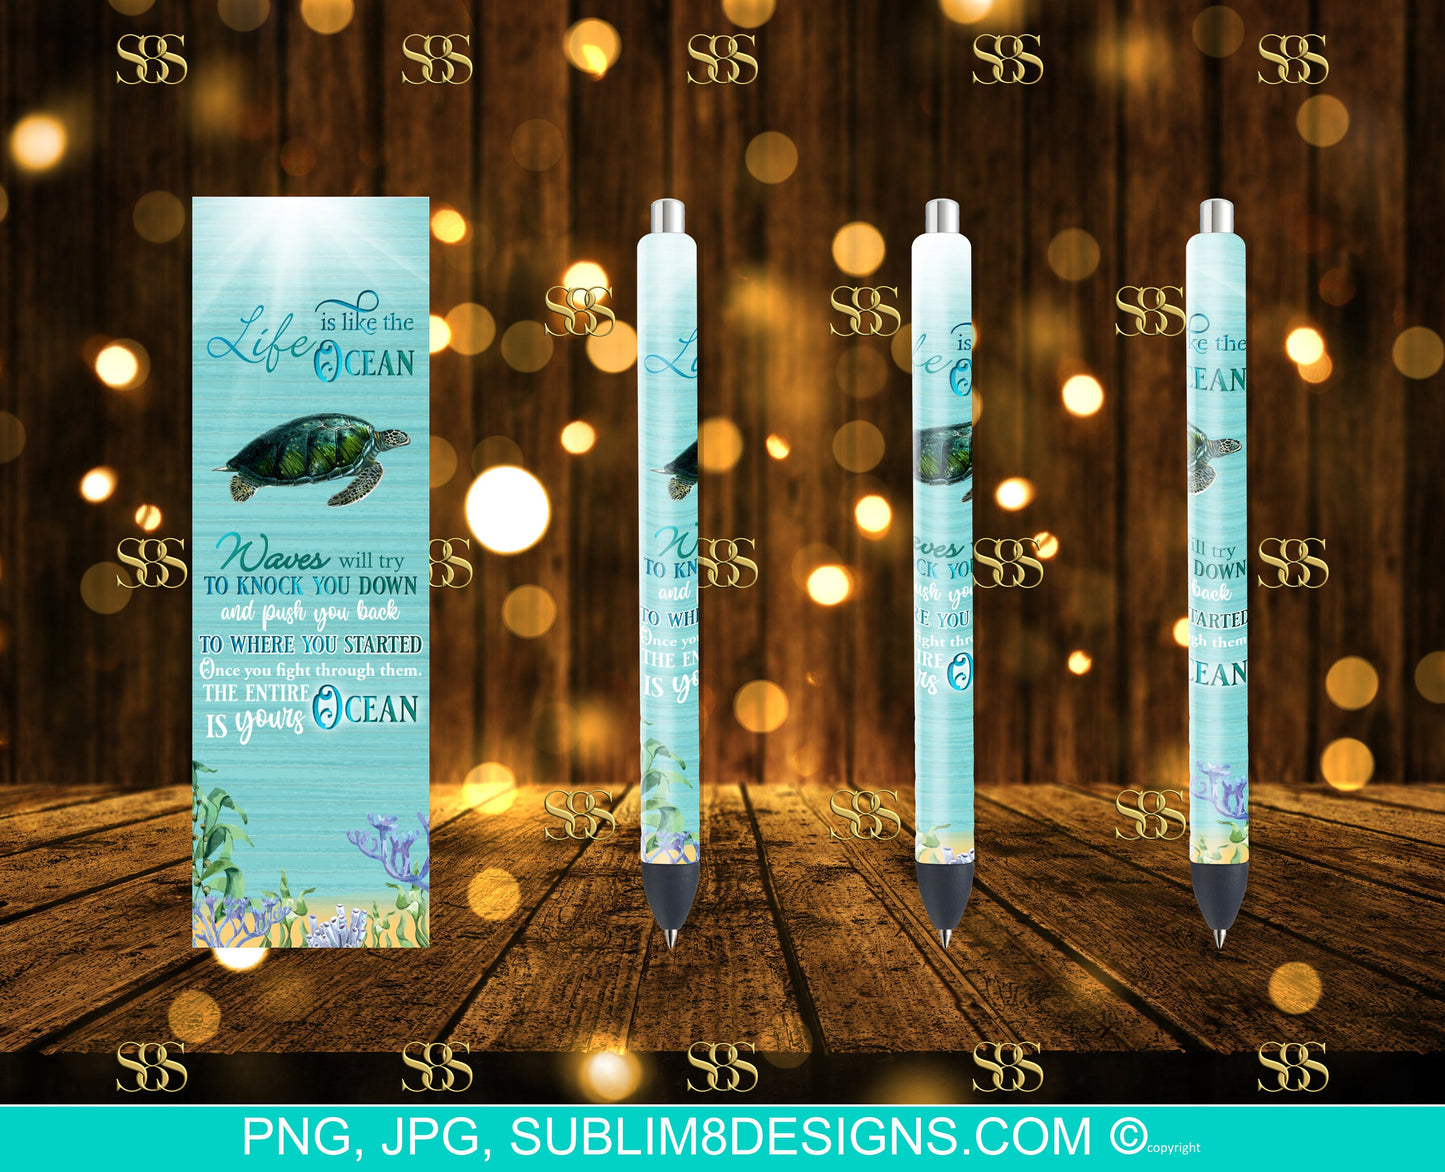 Ocean Resilience: Embracing Life's Waves with the Spirit of the Turtle Sublimation Pen Wrap Design